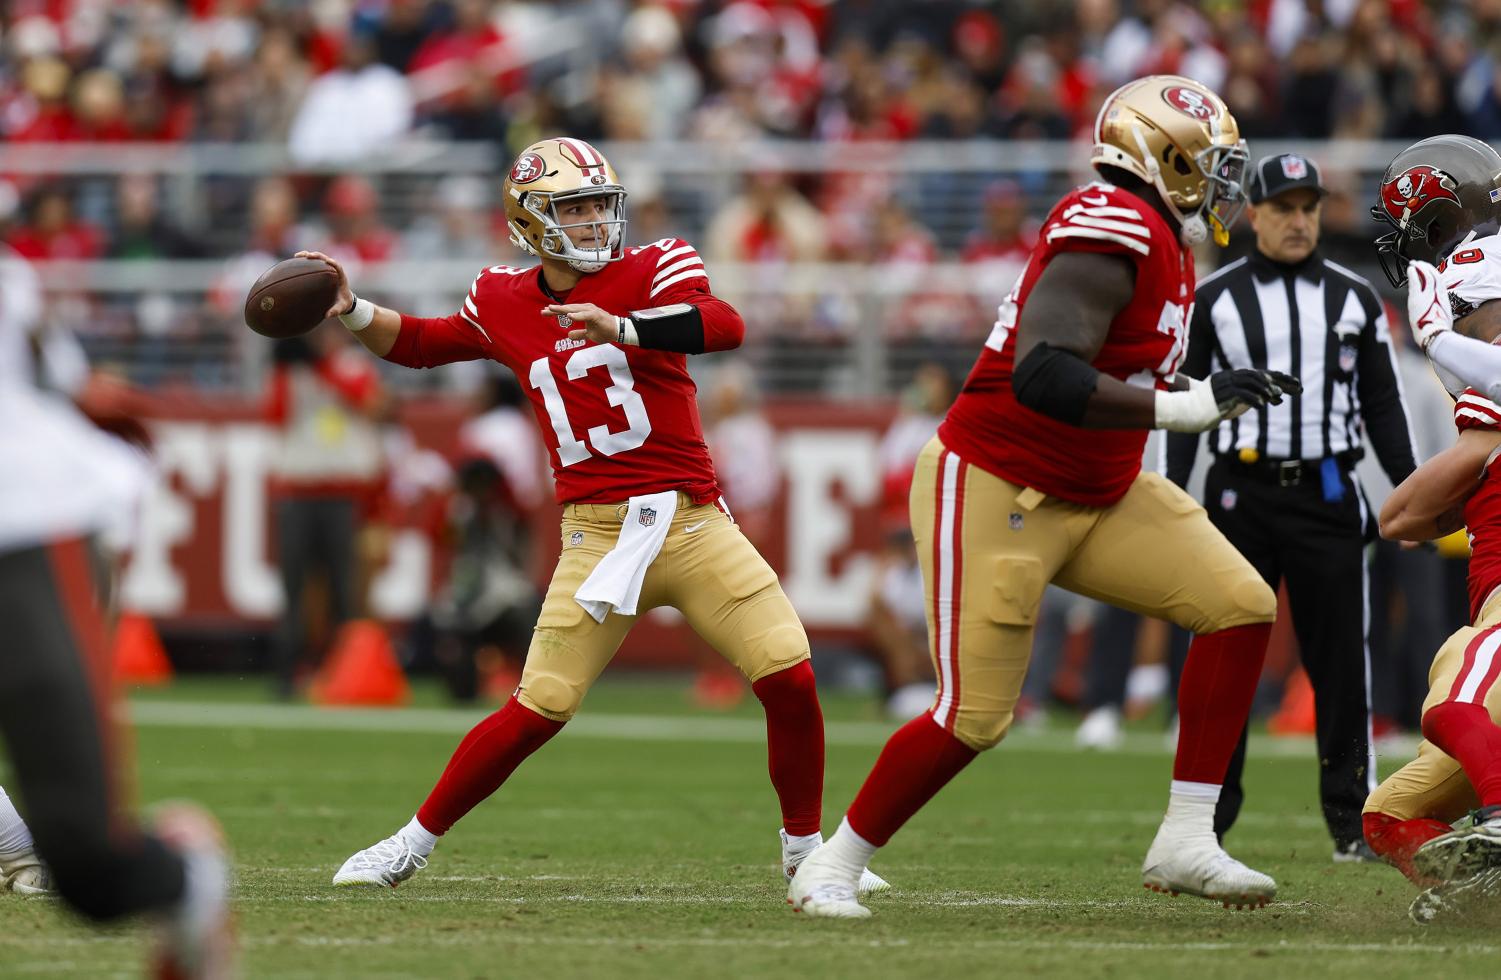 San Francisco 49ers deserve to be top NFL team after Week 1 - NBC Sports